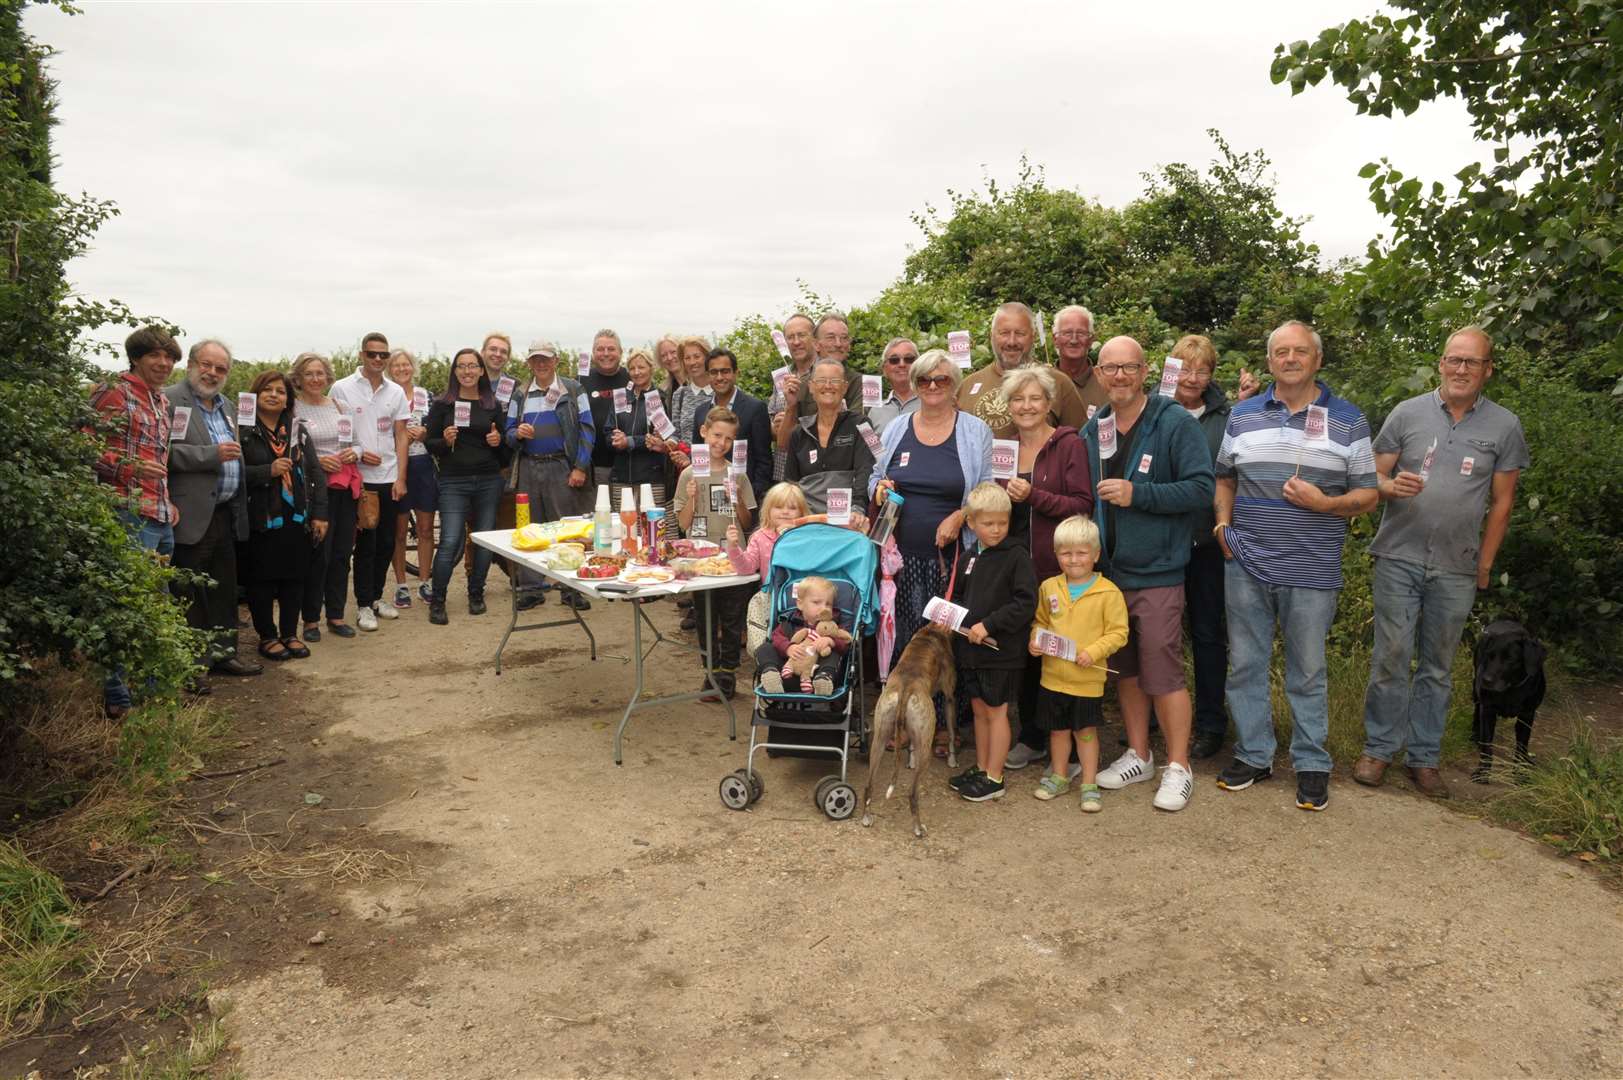 Around 60 people went to the orchard between Pump Lane and Lower Bloors Lane to protest against housing development plans. Picture: Steve Crispe. (14405227)